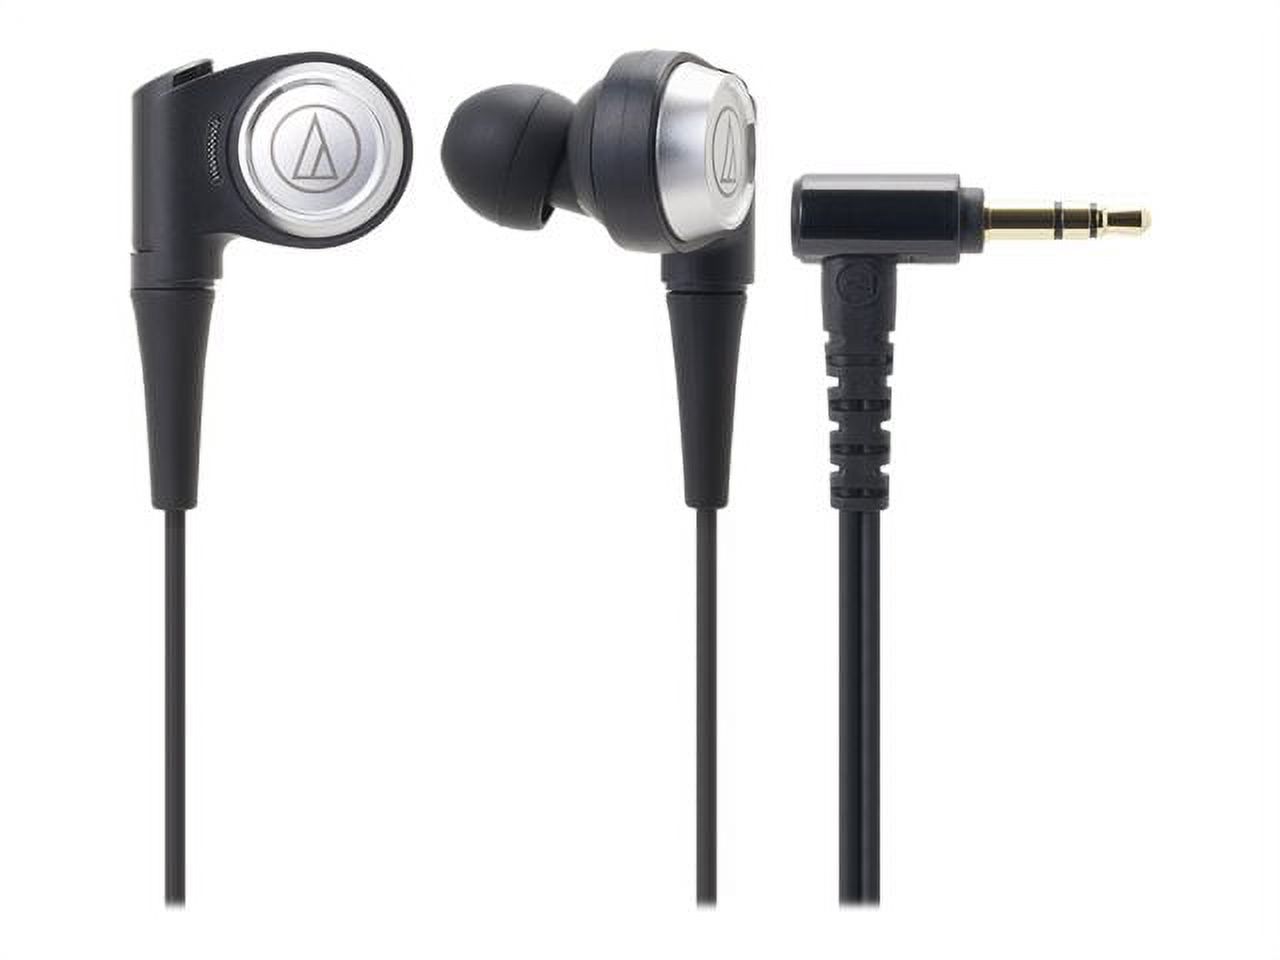 Audio-Technica ATH-CK9 SonicPro CK9 Earbuds - image 2 of 7